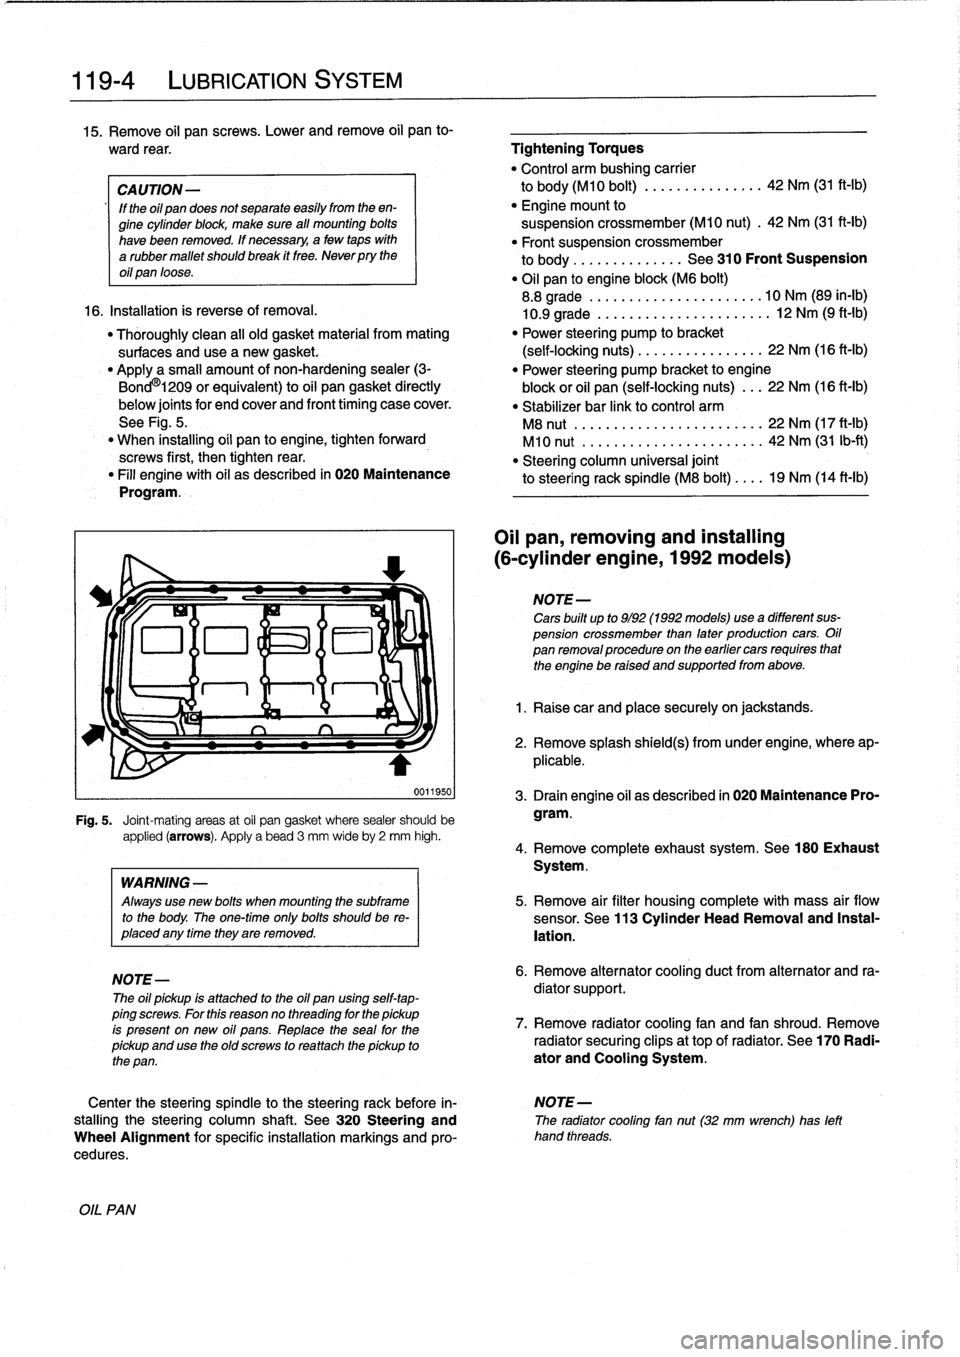 BMW 328i 1995 E36 Workshop Manual 
119-
4

	

LUBRICATION
SYSTEM

15
.
Remove
oil
pan
screws
.
Lower
andremove
oil
pan
to-

ward
rear
.

	

Tightening
Torques

"
Control
arm
bushing
carrier

CAUTION-

	

to
body(M10
bolt)
............